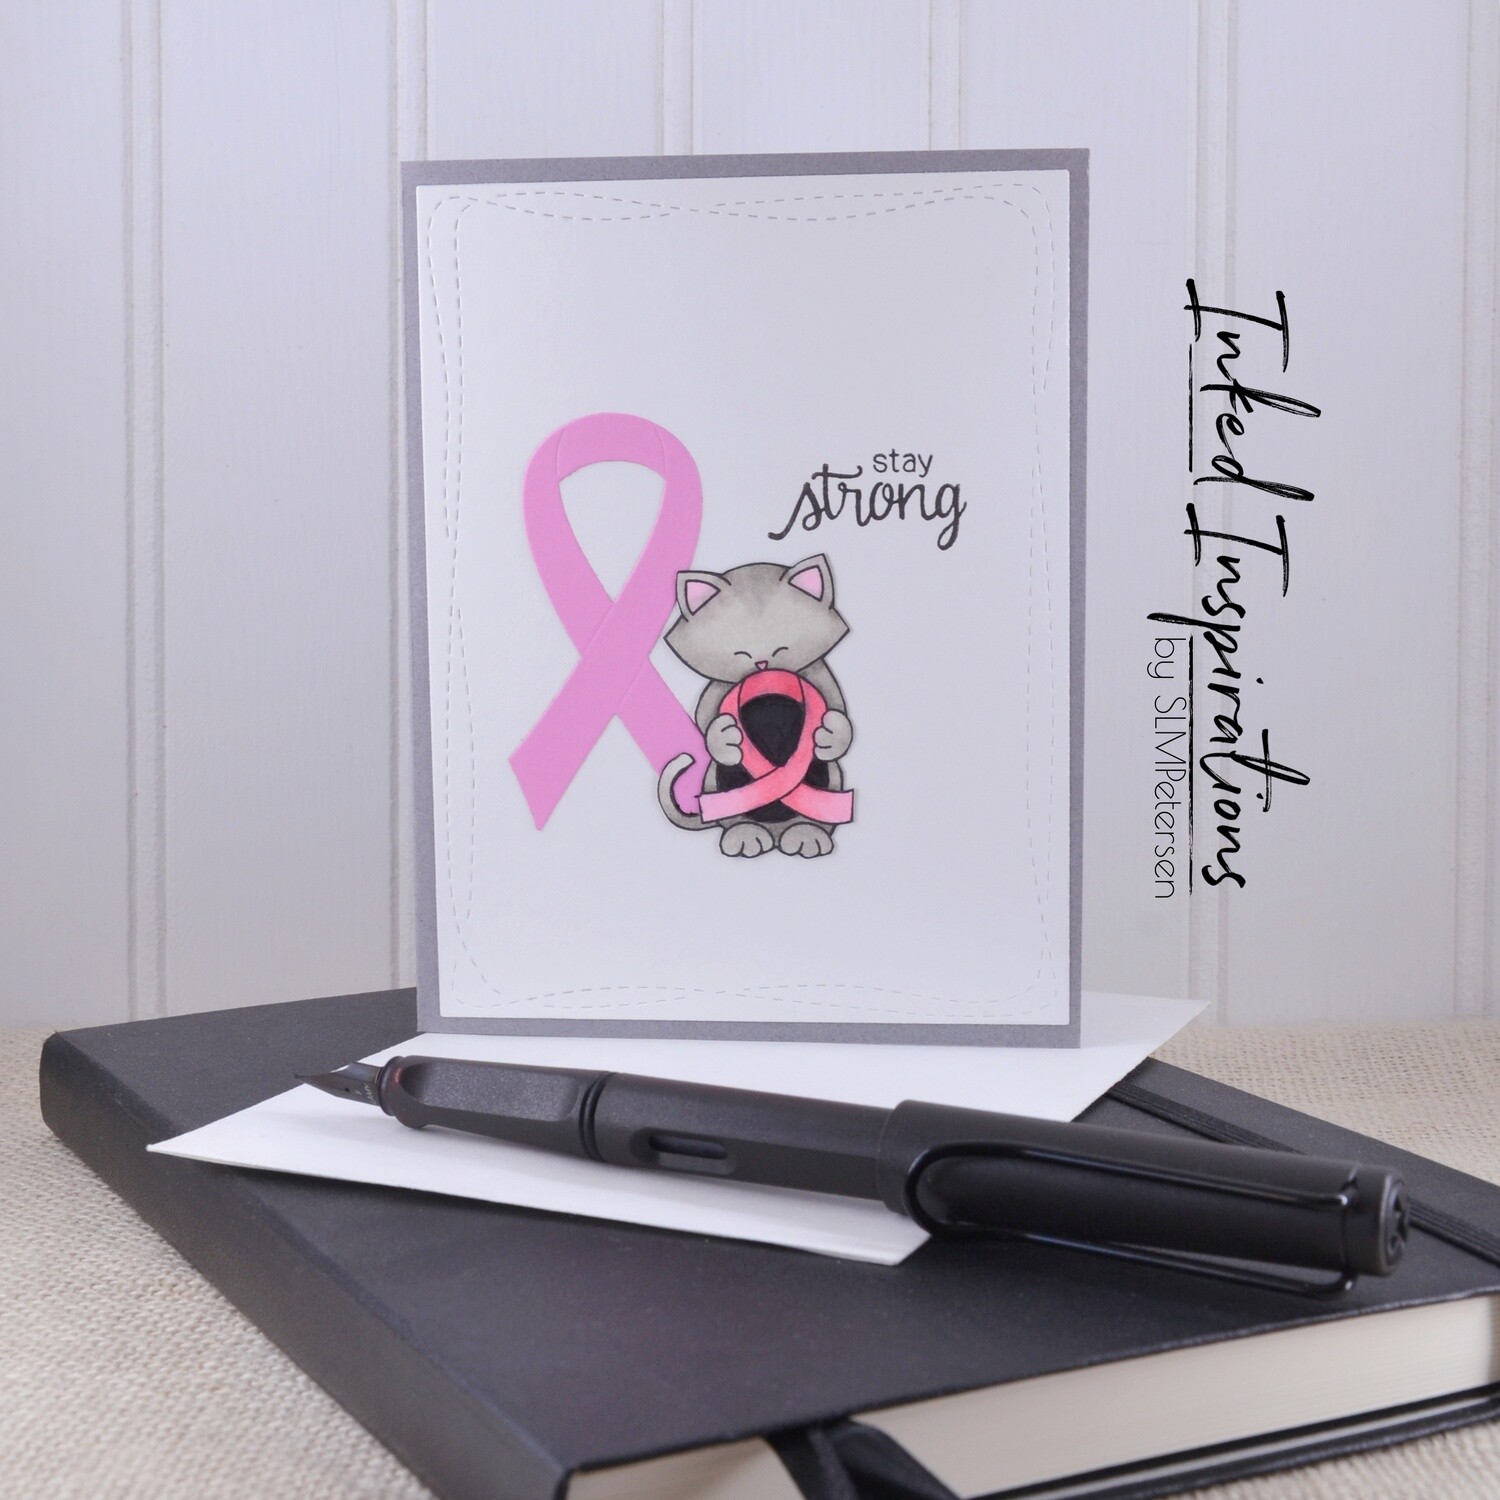 Stay Strong - Pink Ribbon & Grey Kitty